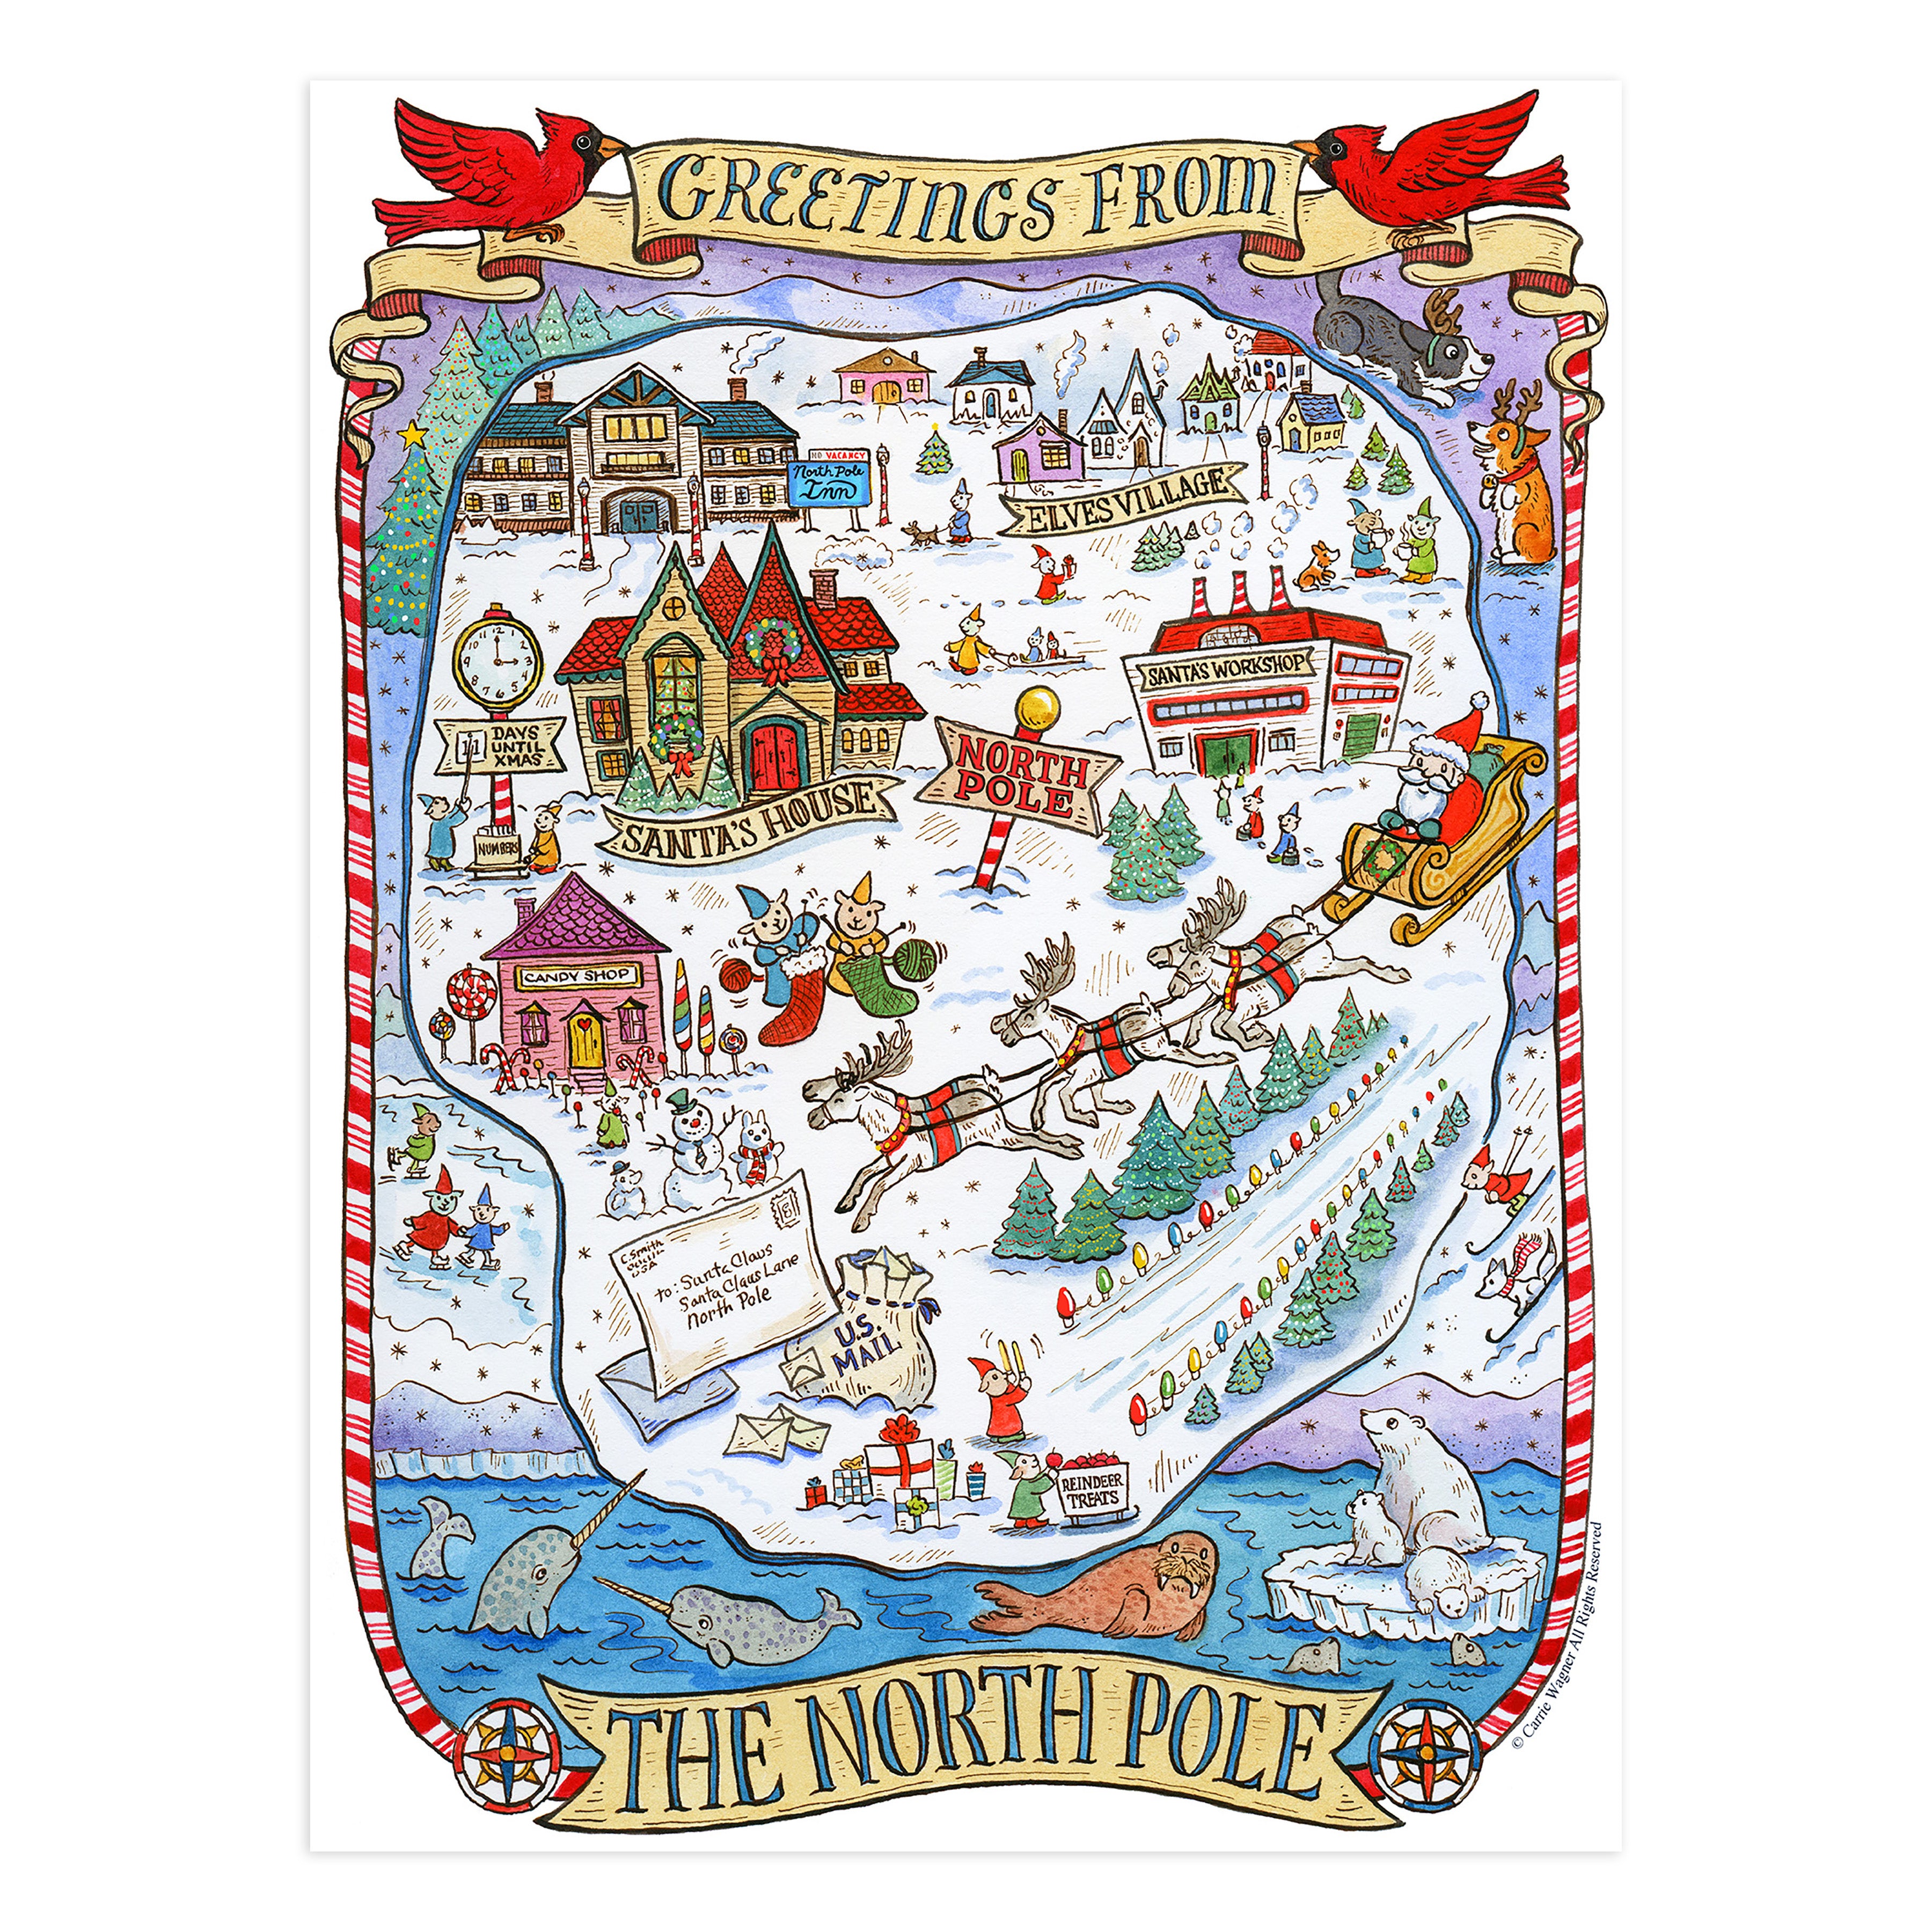 1000 Piece Greetings From The North Pole Map Christmas Jigsaw Puzzle - 0